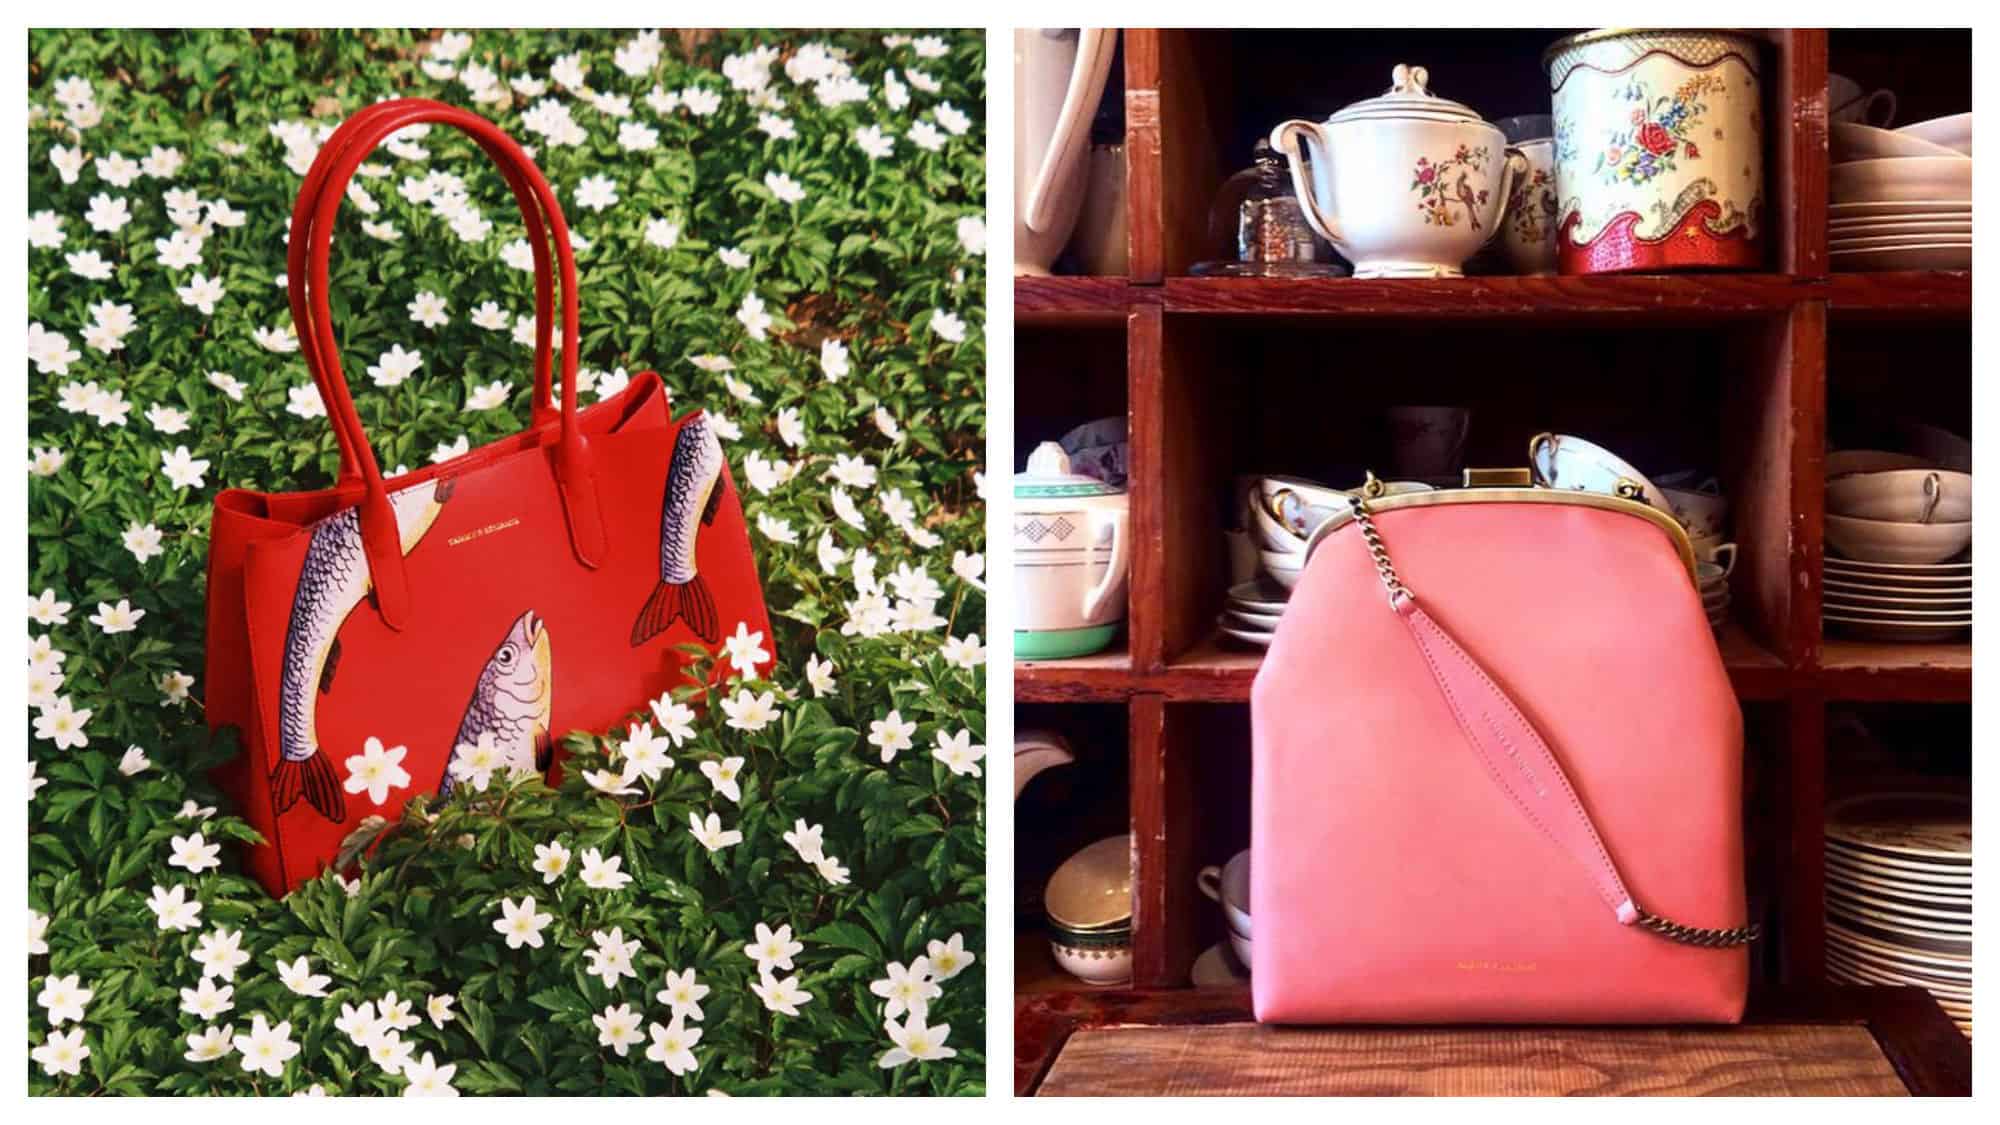 A red Tammy and Benjamin handbag with fish painted on it (left) and a coral chain purse (right) are among our favorite Paris fashion accessories.